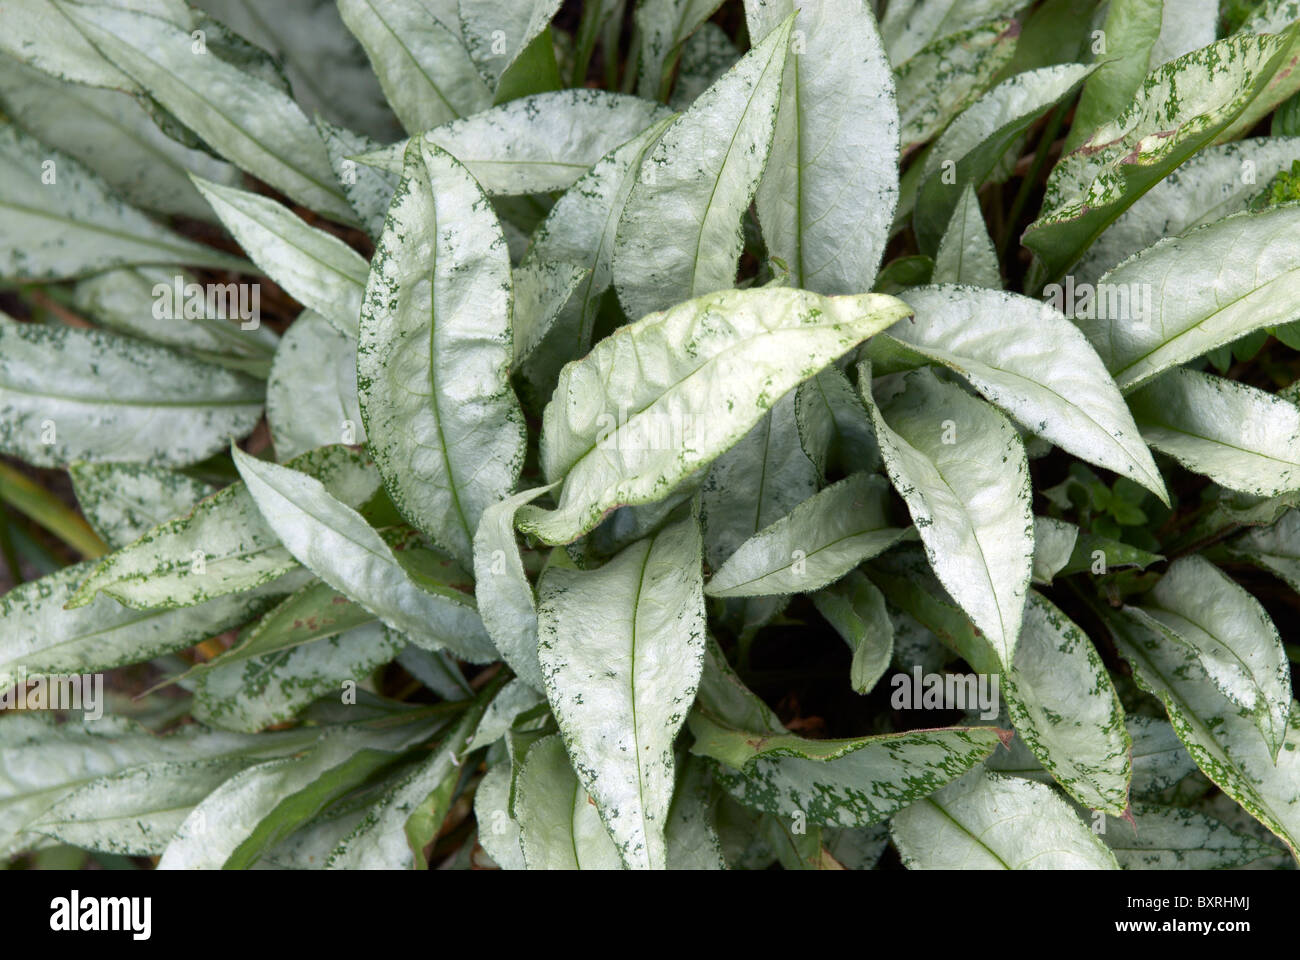 Pulmonaria ‘Diana Clare’ (Lungwort), mottled pale silvery green leaves, close-up Stock Photo